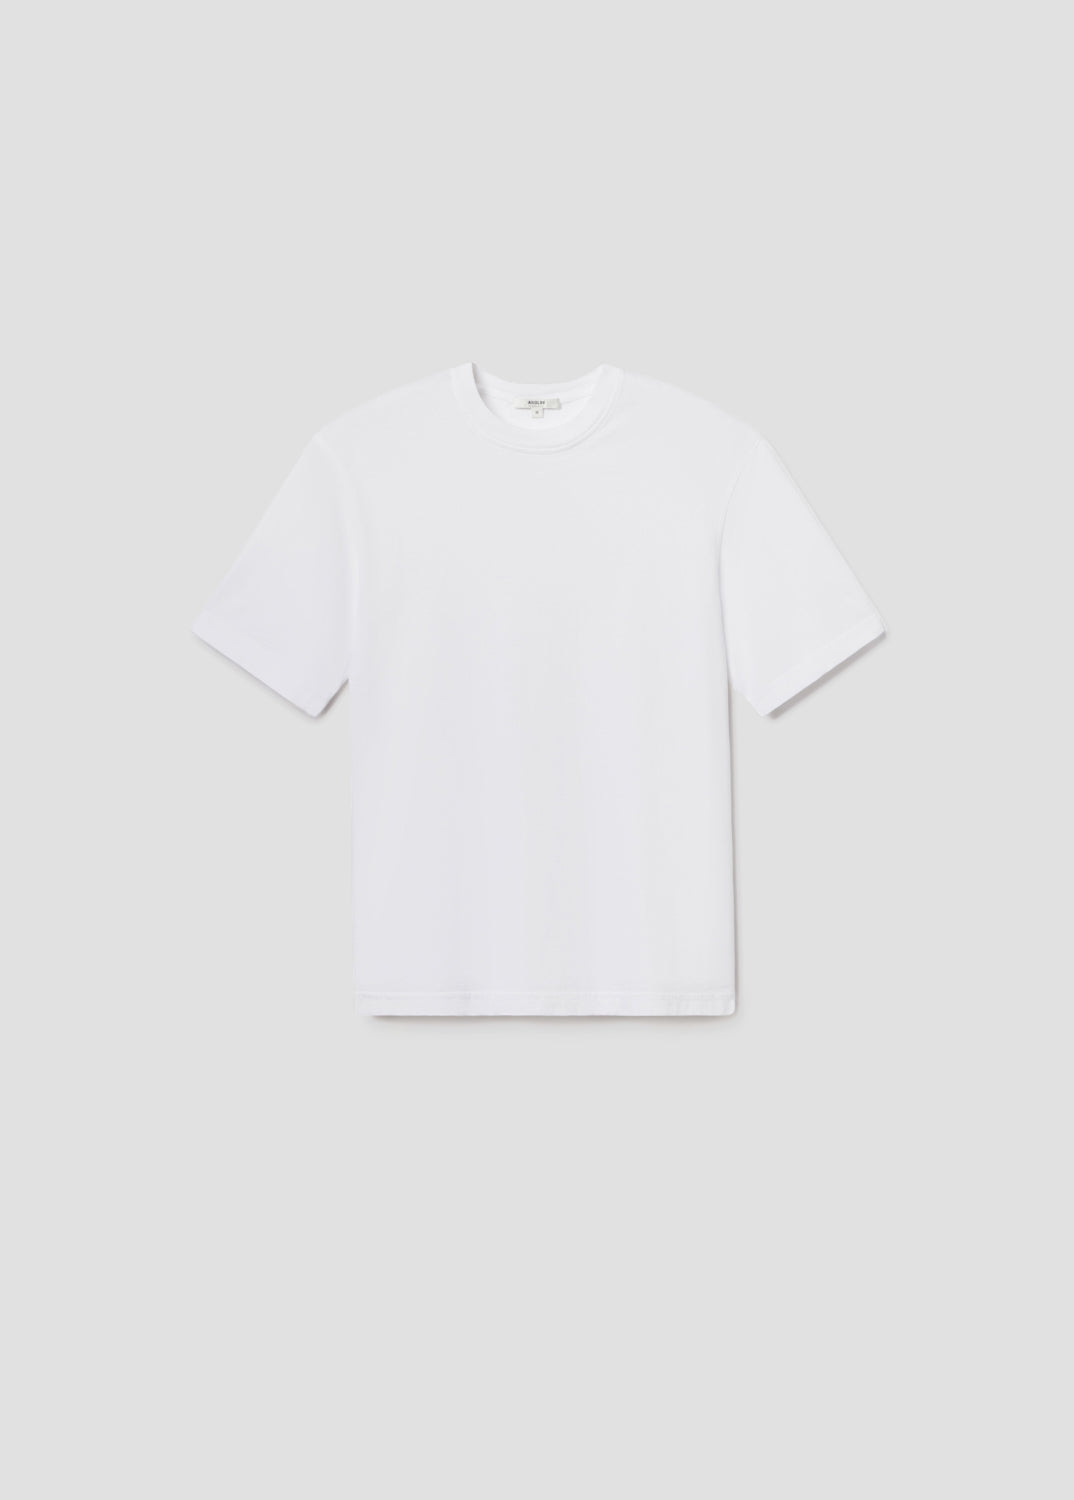 Asha Mock Neck Tee in White Front